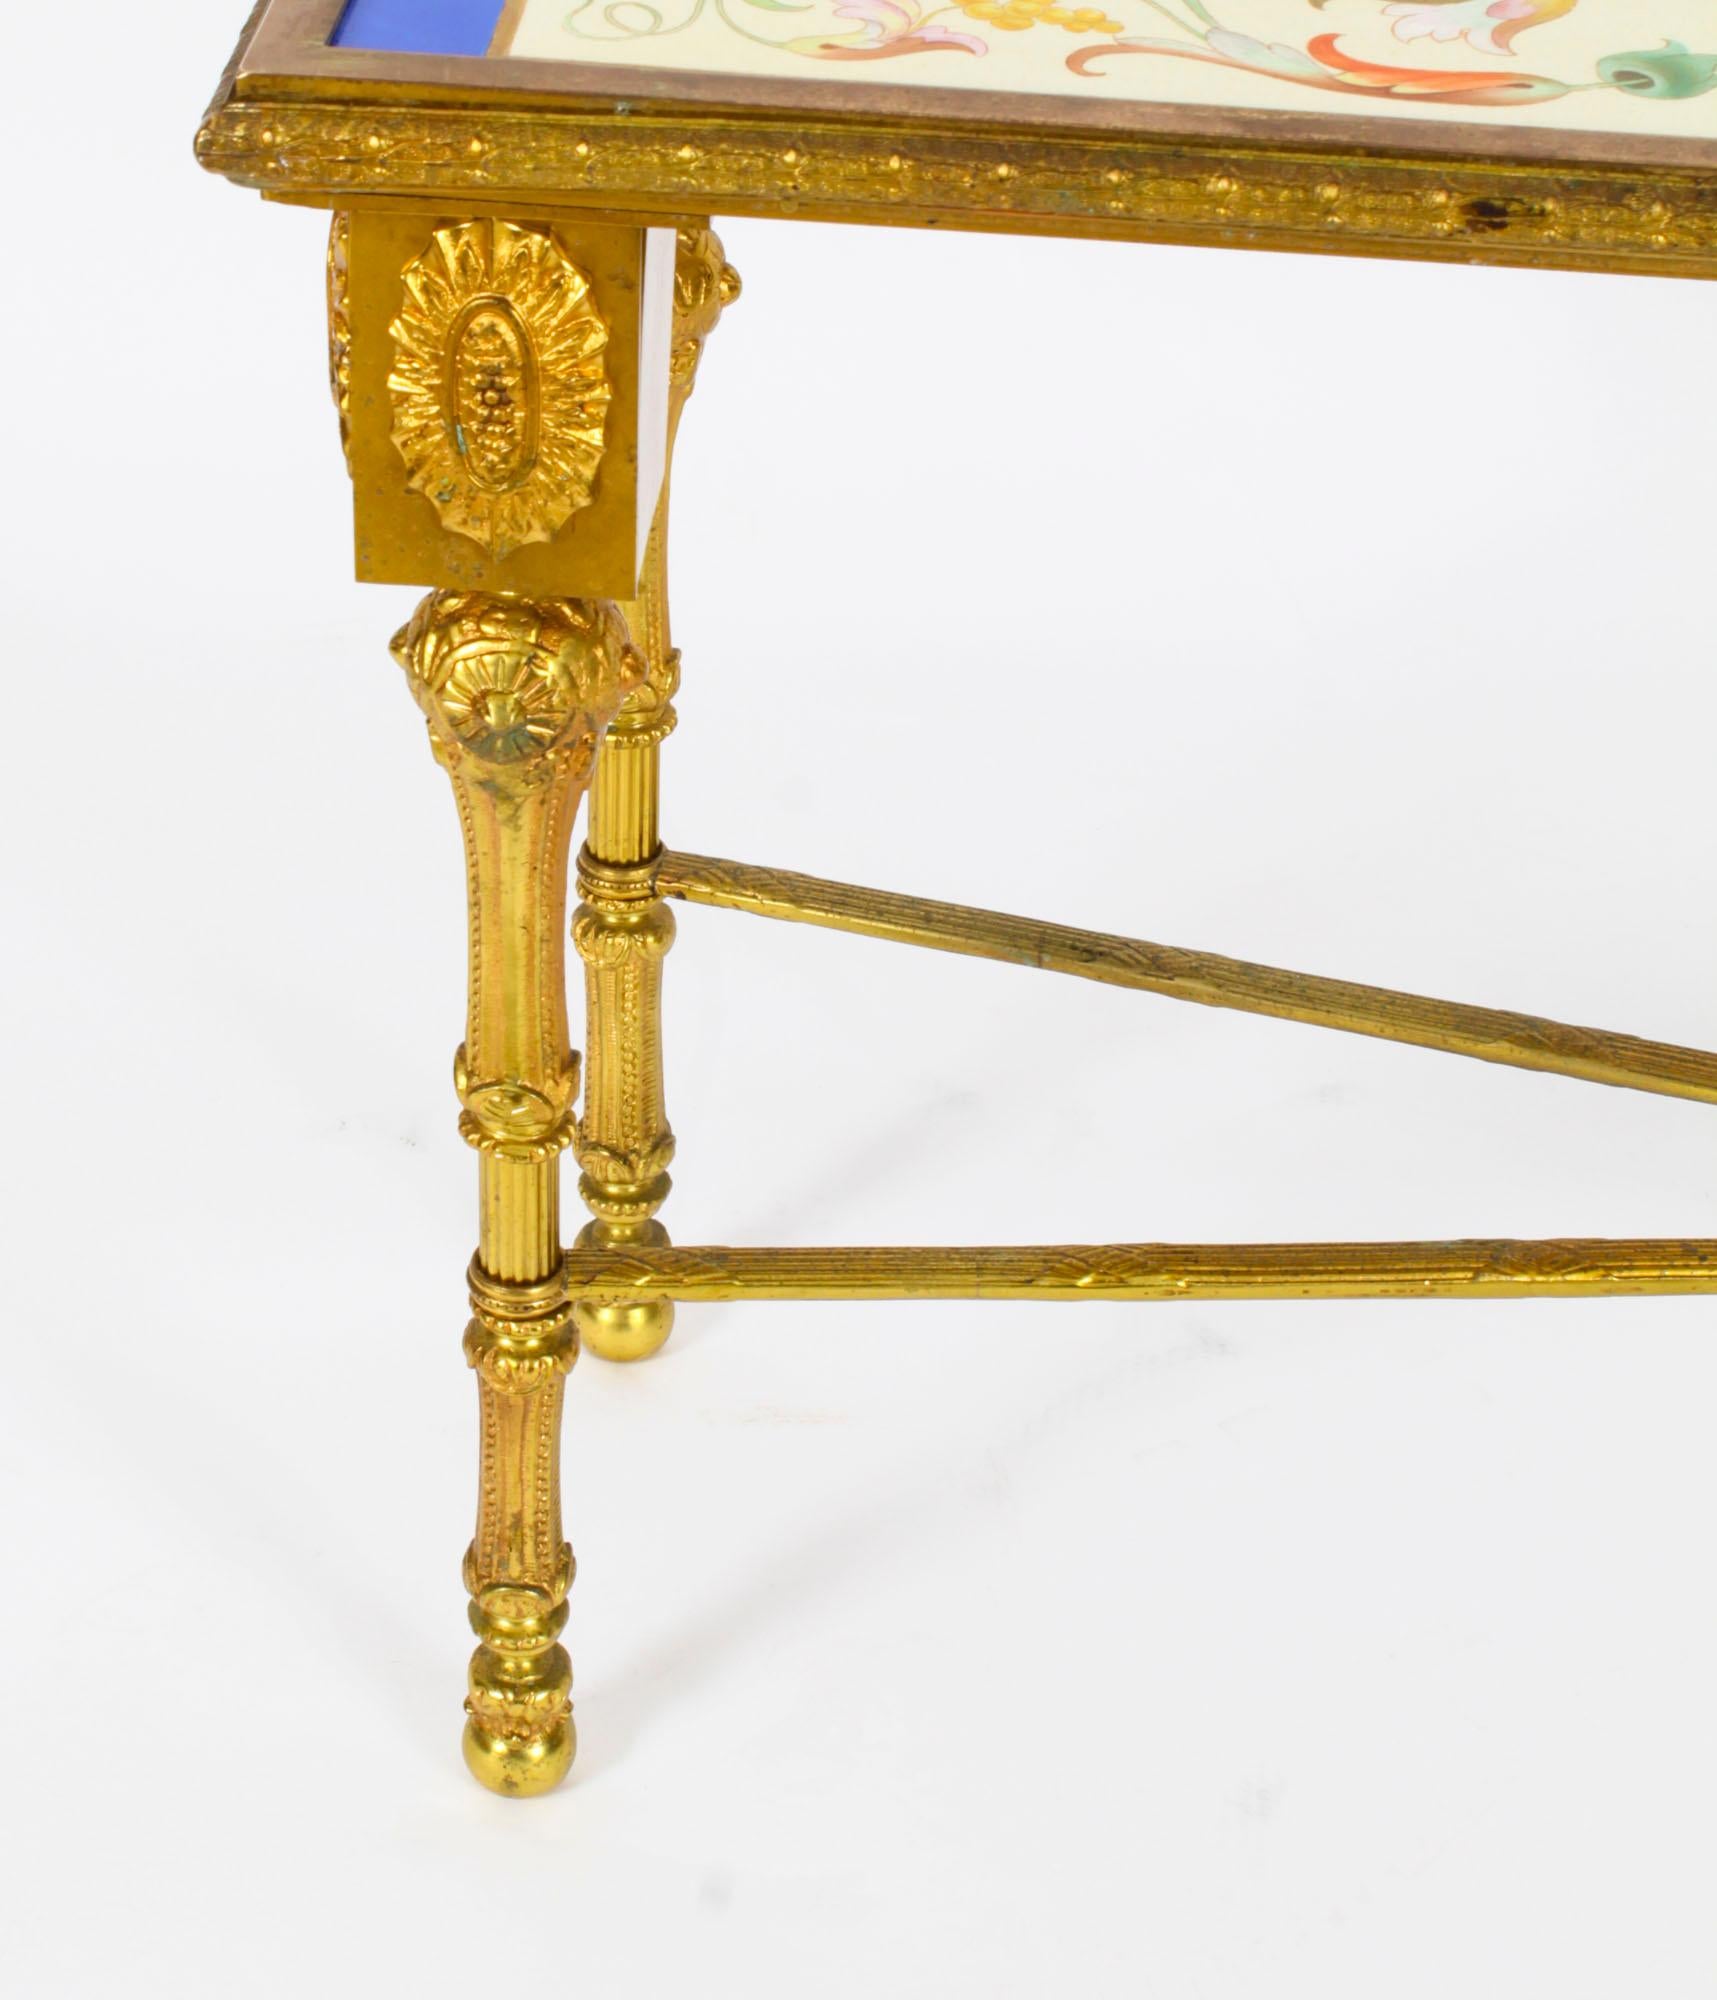 Antique Regency Revival Ormolu Mounted Table Display Stand Late 19th C 7